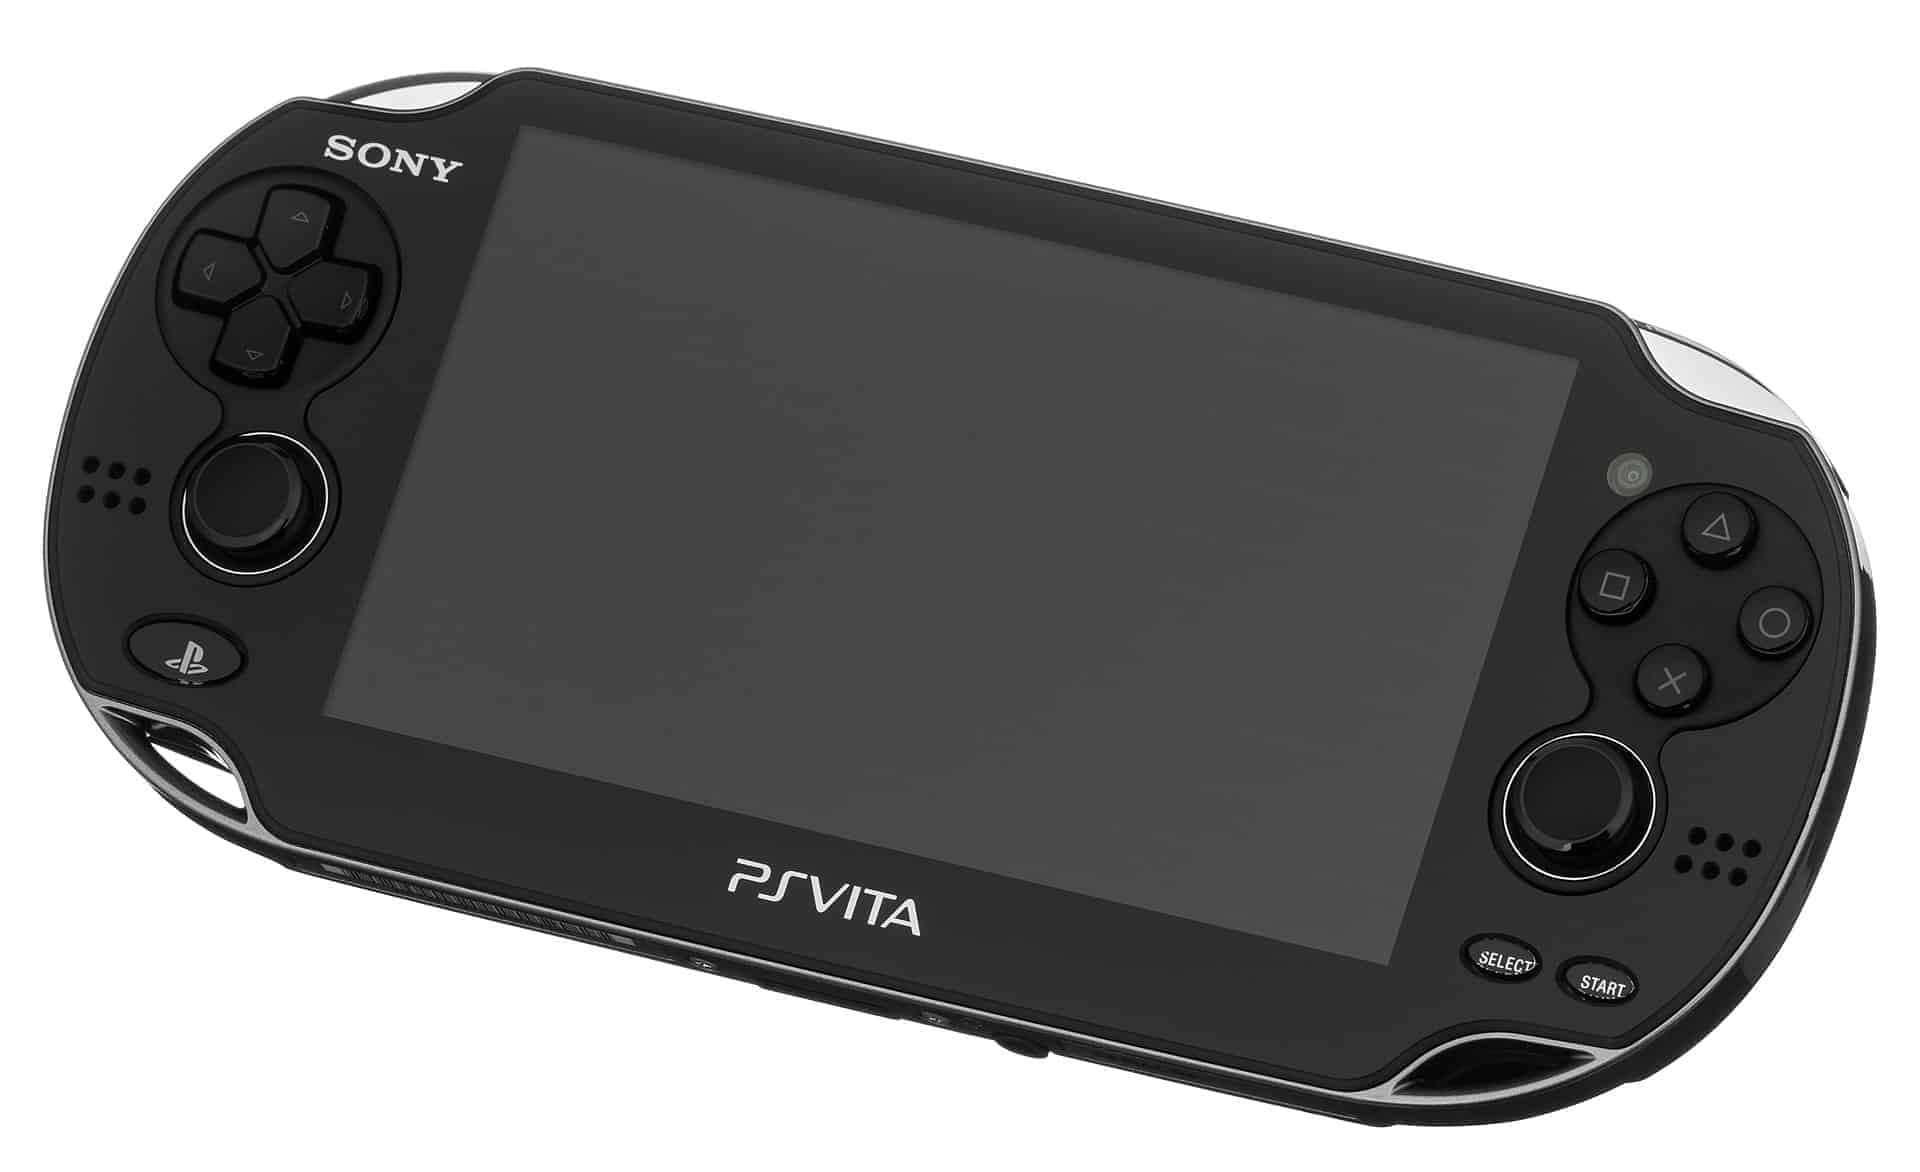 PS Vita Is It Worth It To Buy This Portable Gaming Console? in May